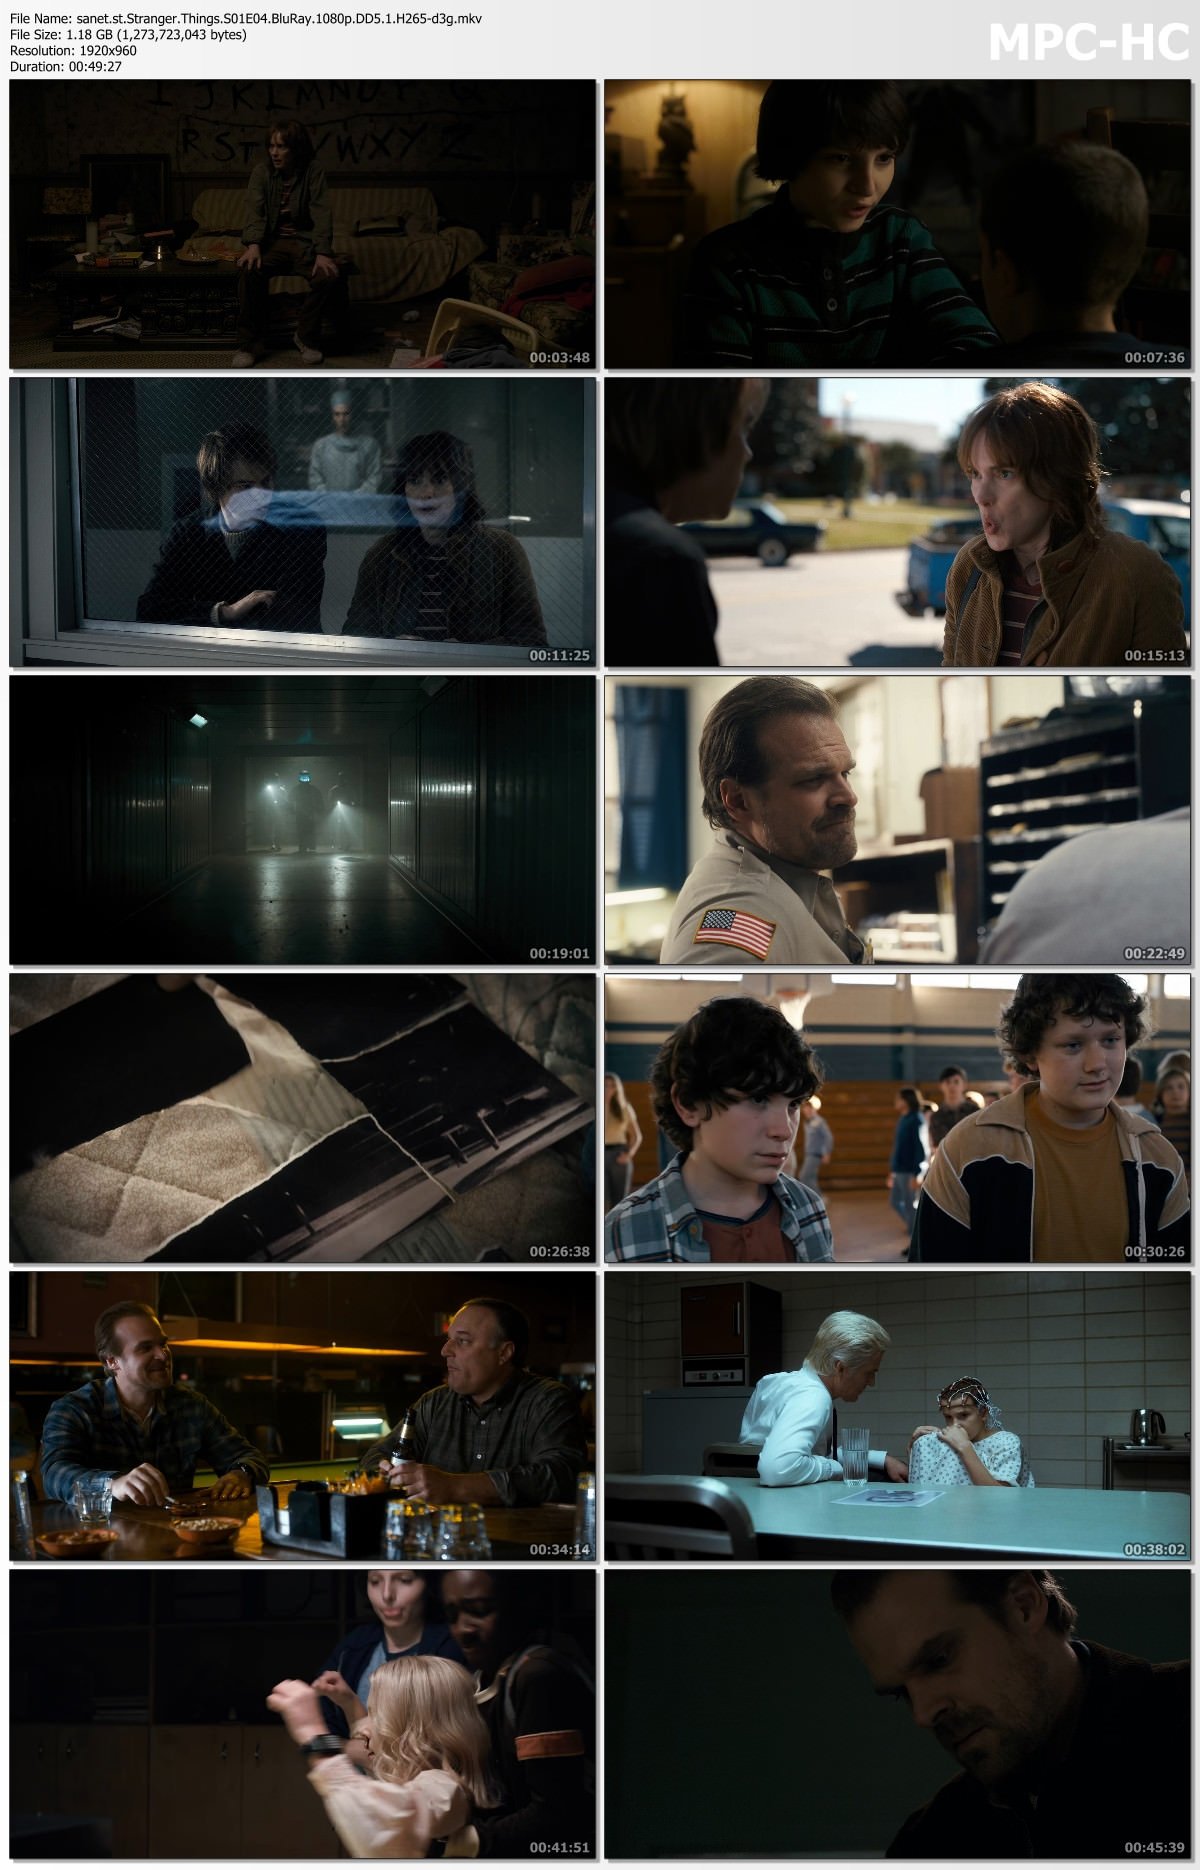 Download Stranger Things S01 BluRay 1080p DD5.1 H265-d3g - SoftArchive1200 x 1870